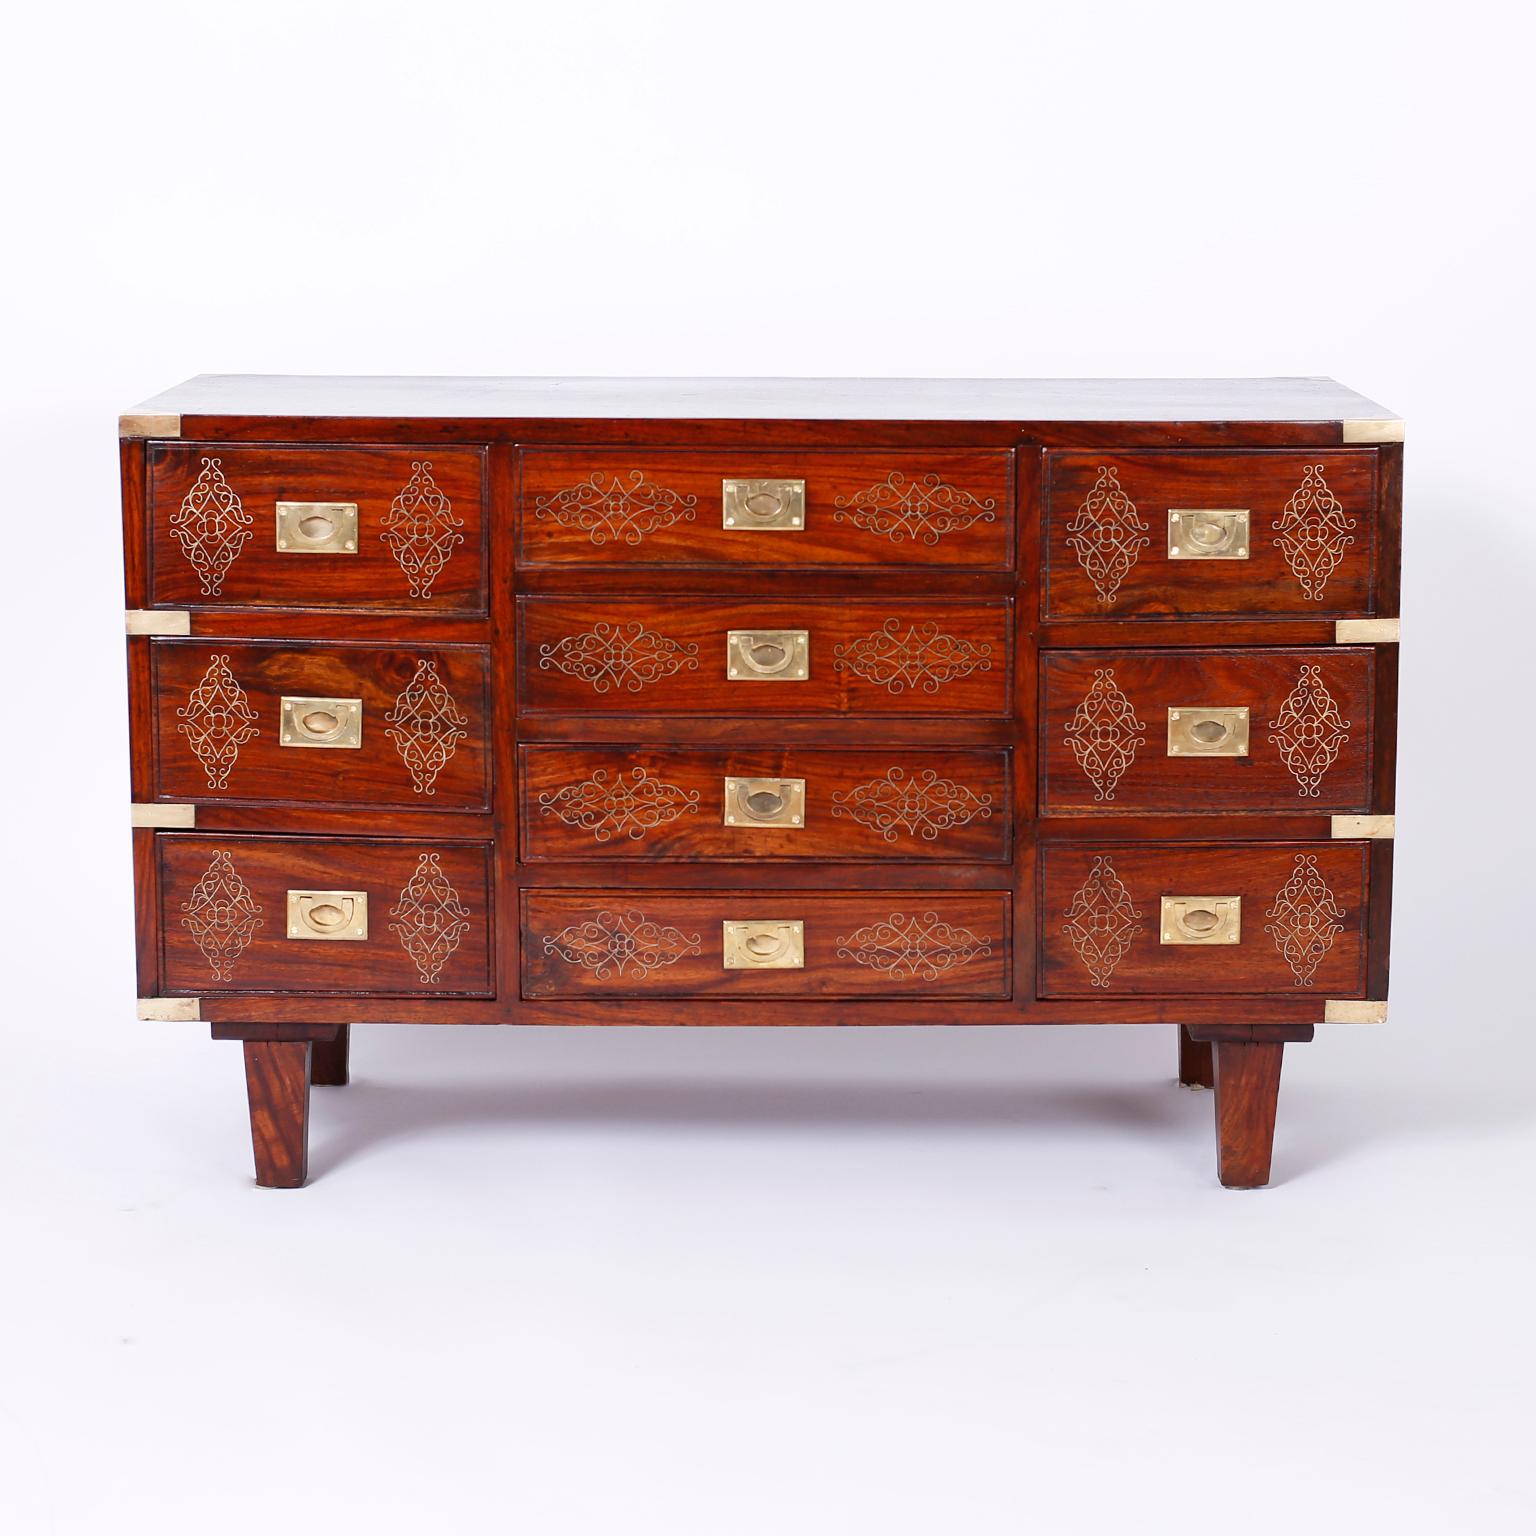 Anglo-Indian chest expertly crafted in rosewood with ten drawers and featuring symbolic floral brass string inlays on the top, drawer fronts and sides, campaign hardware and tapered legs. As seen in the last photo of the listing, a similar chest is